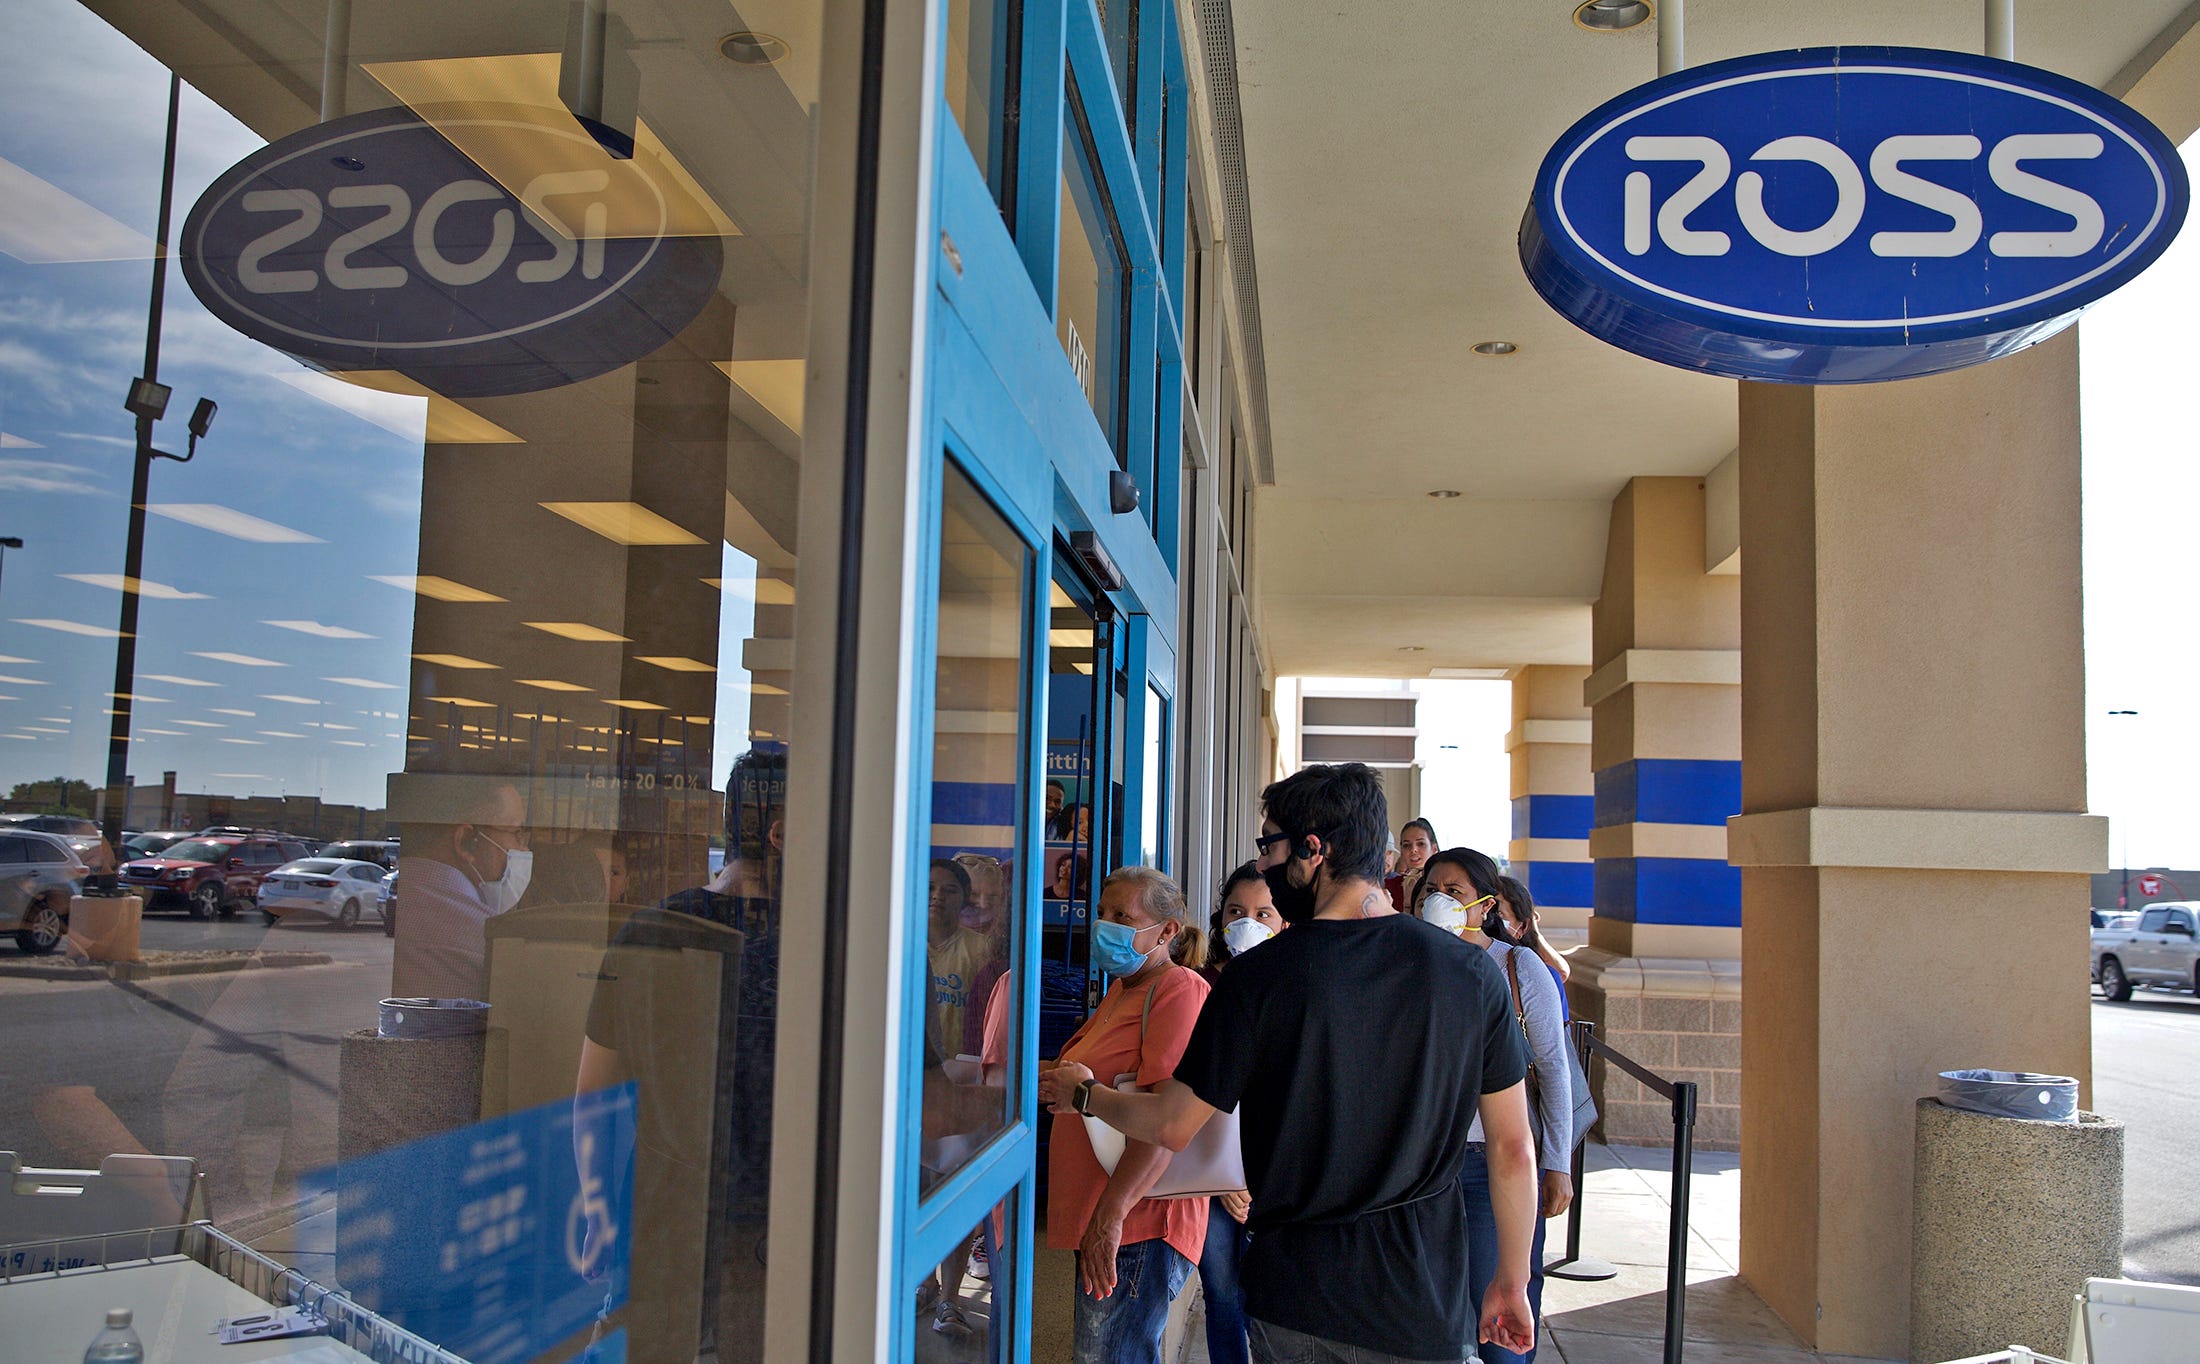 Ross Dress for Less reopens to long 